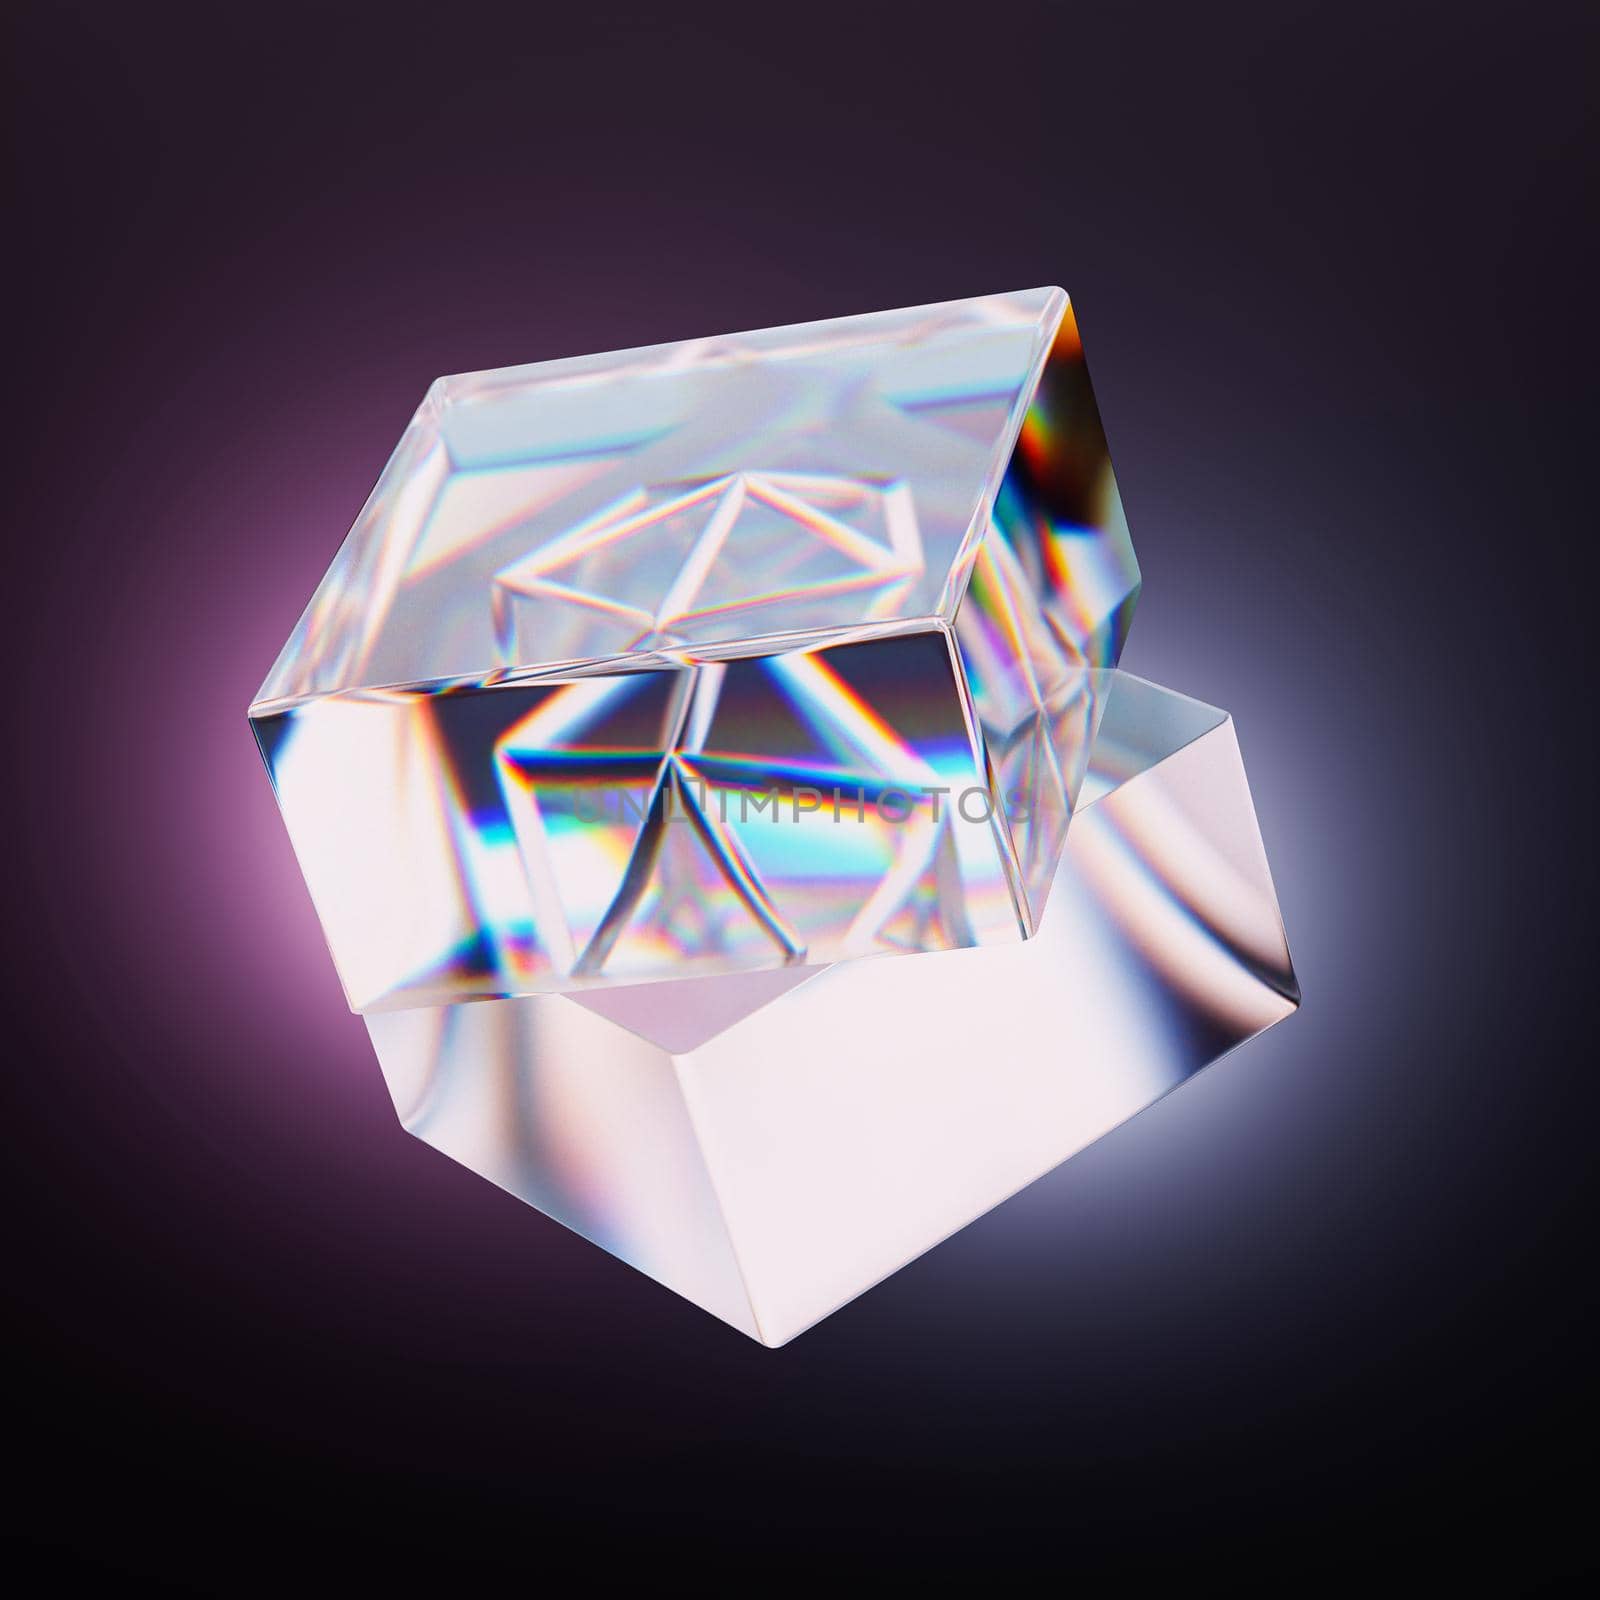 Abstract glass square crystal with dispersion on black background with gradient light, 3d illustration render